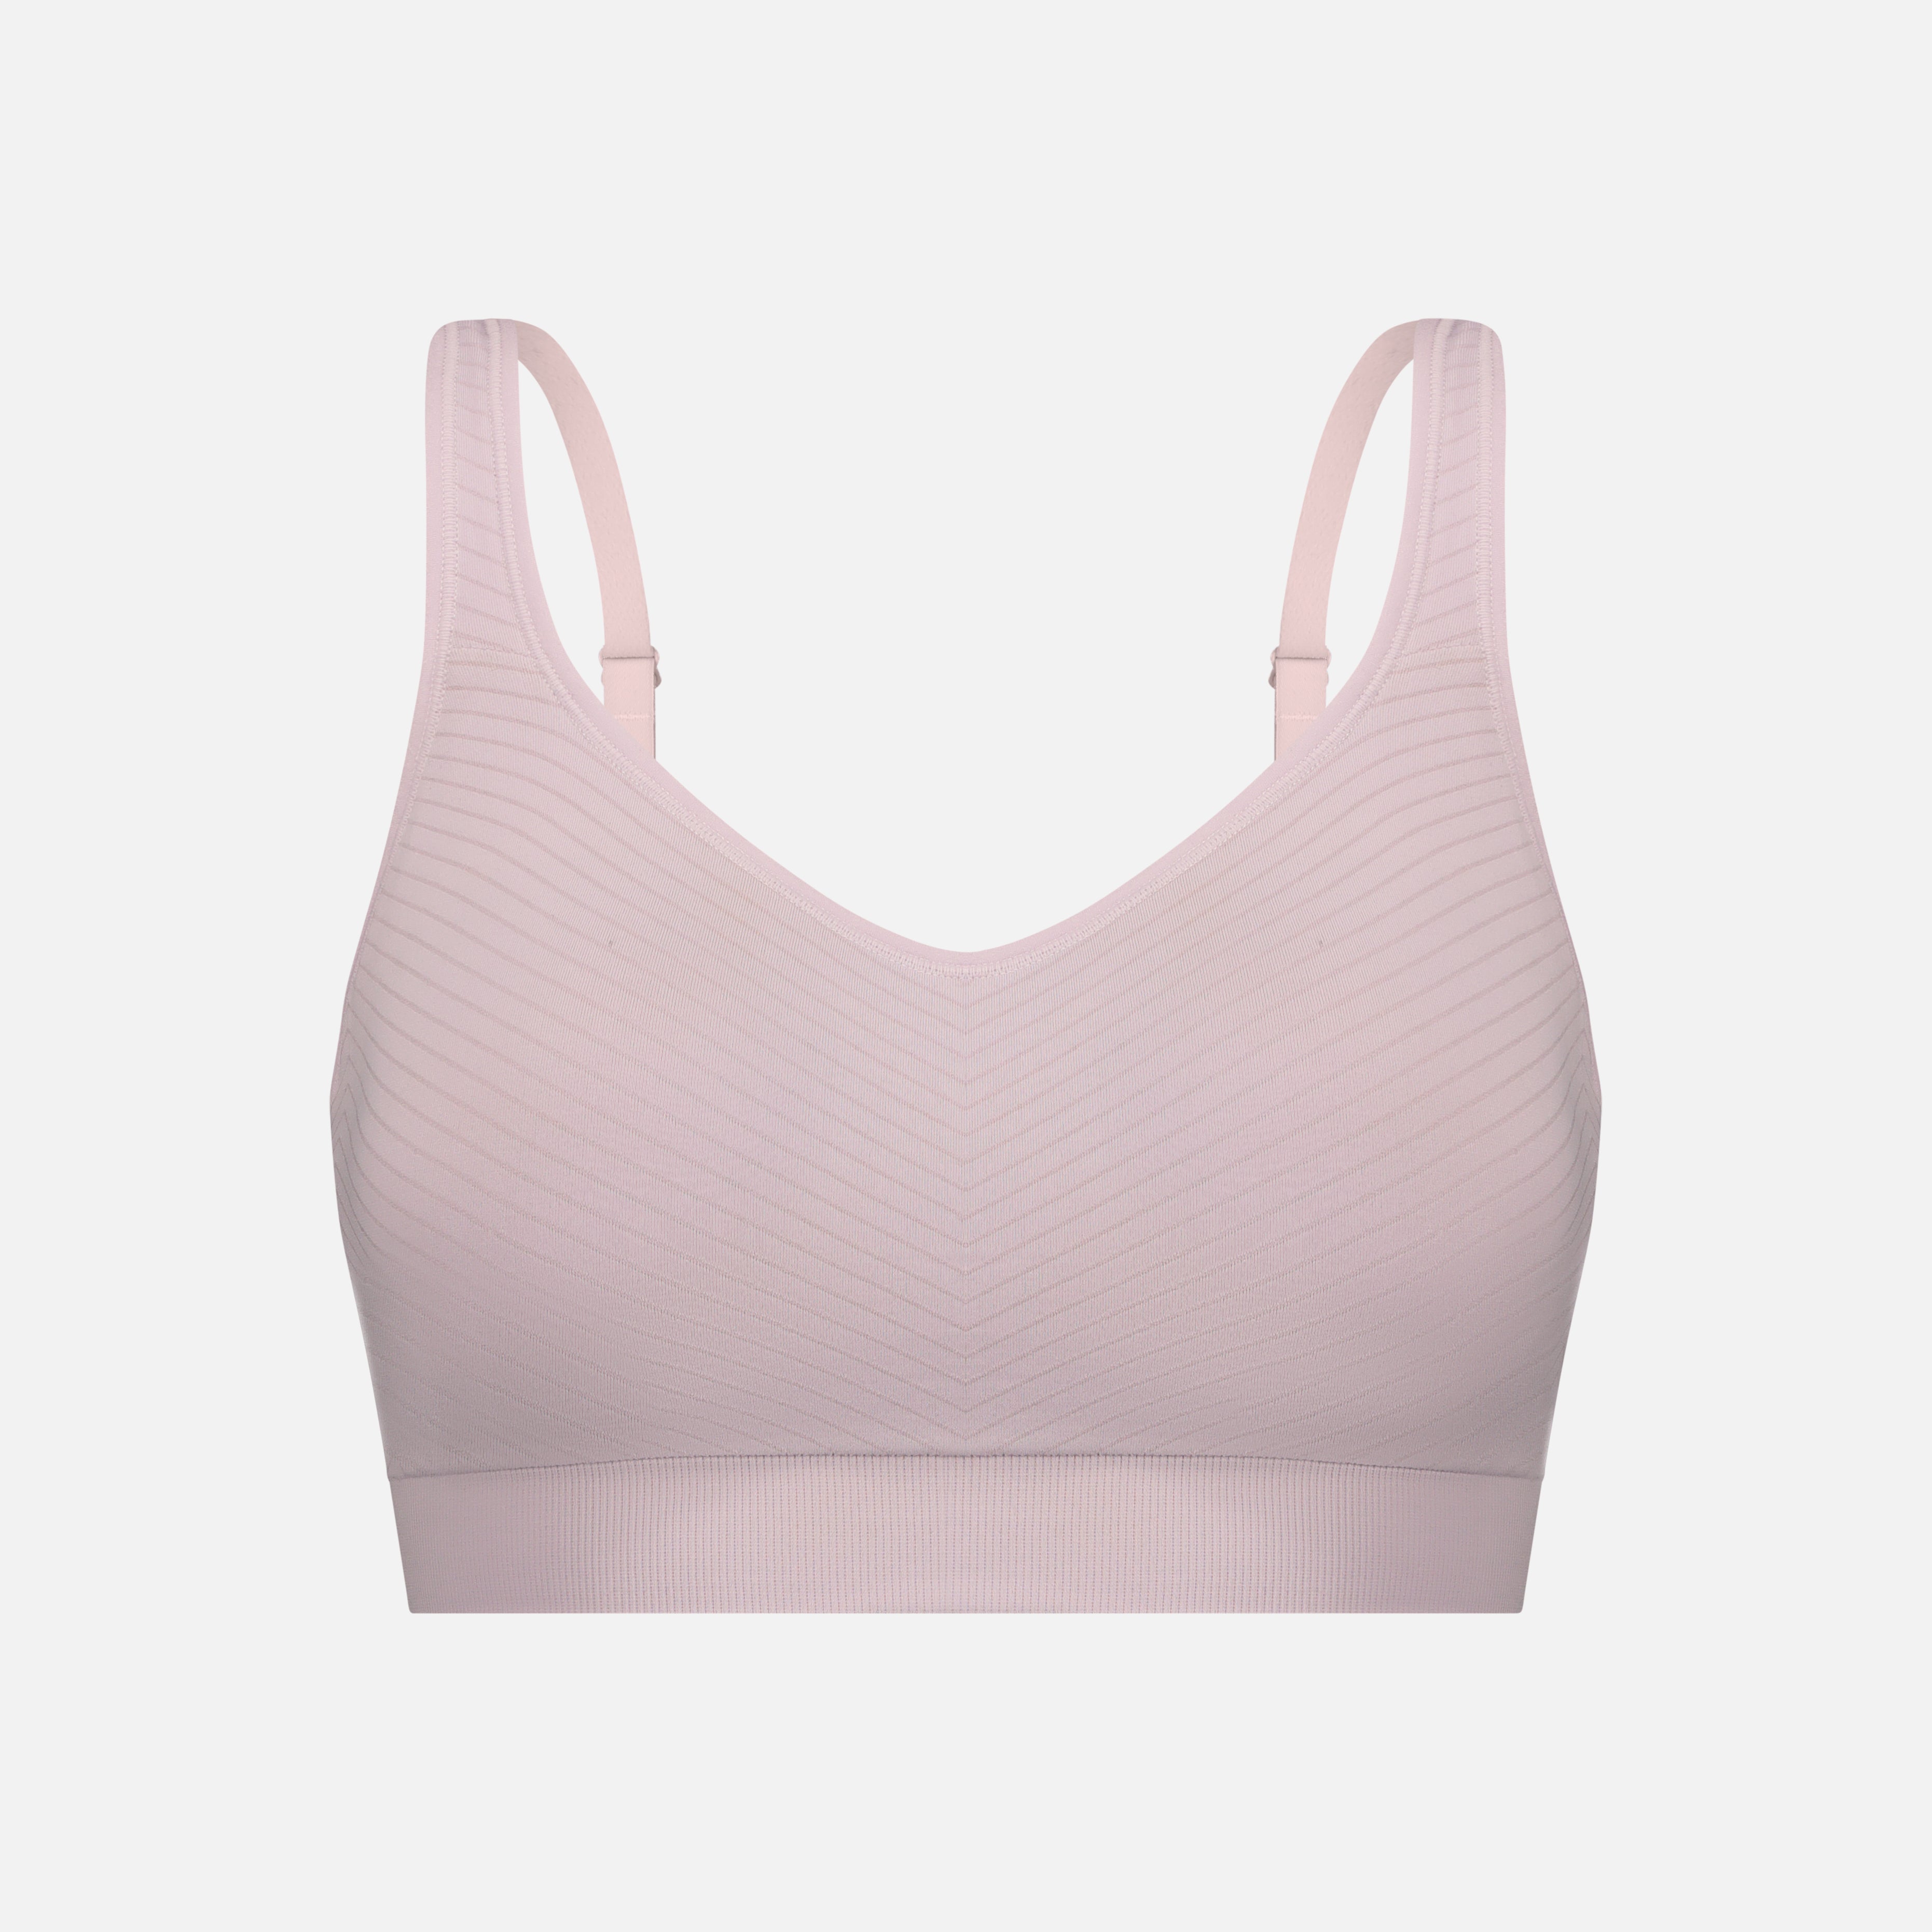 The Comfort Bra with Stripes